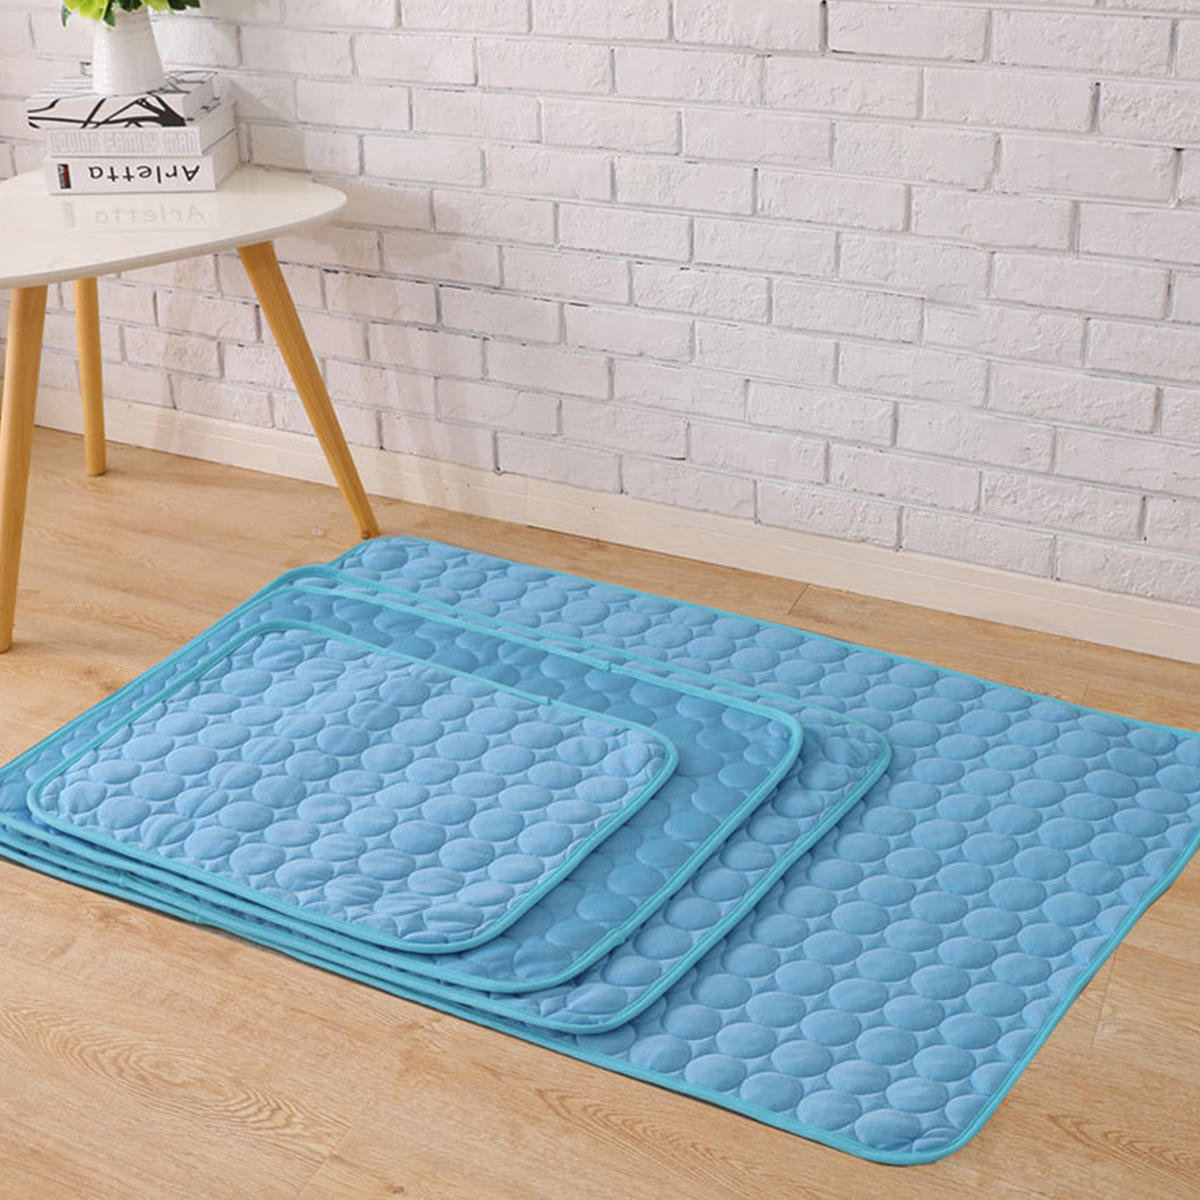 Pets Cooling Mat Non-Toxic Cool Pad Cooling Pad Bed Summer Dogs Cats Cushion-heyidear